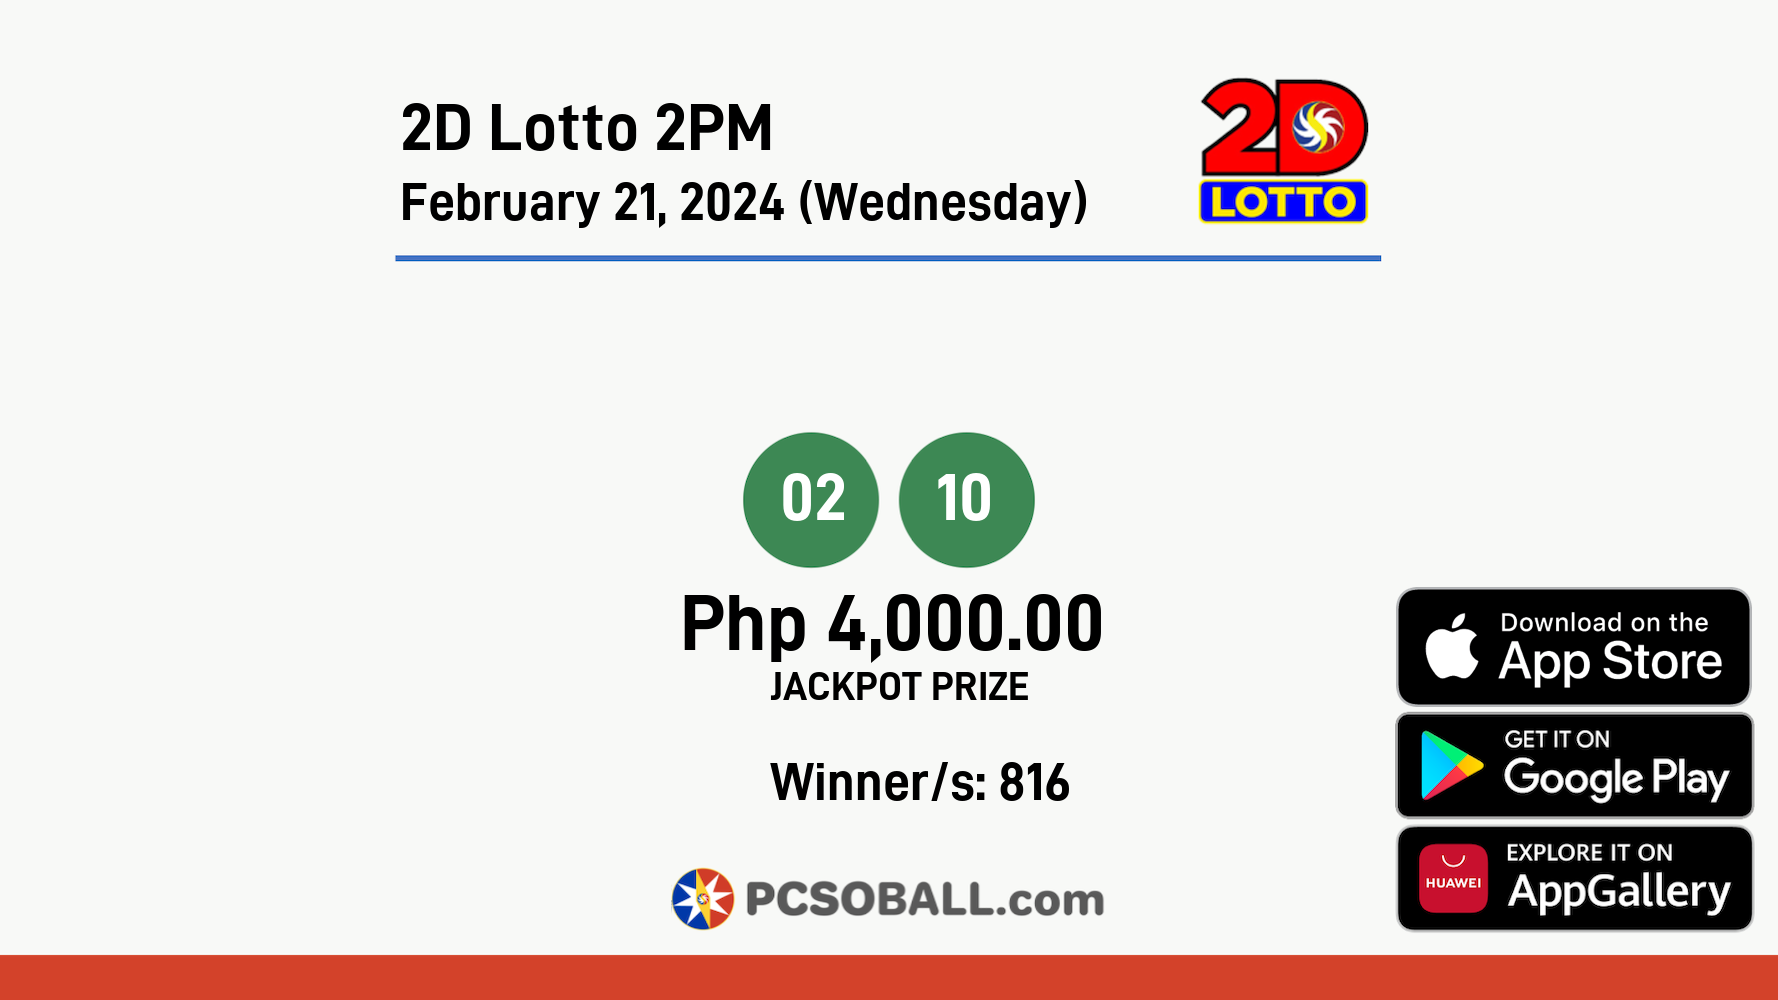 2D Lotto 2PM February 21, 2024 (Wednesday) Result